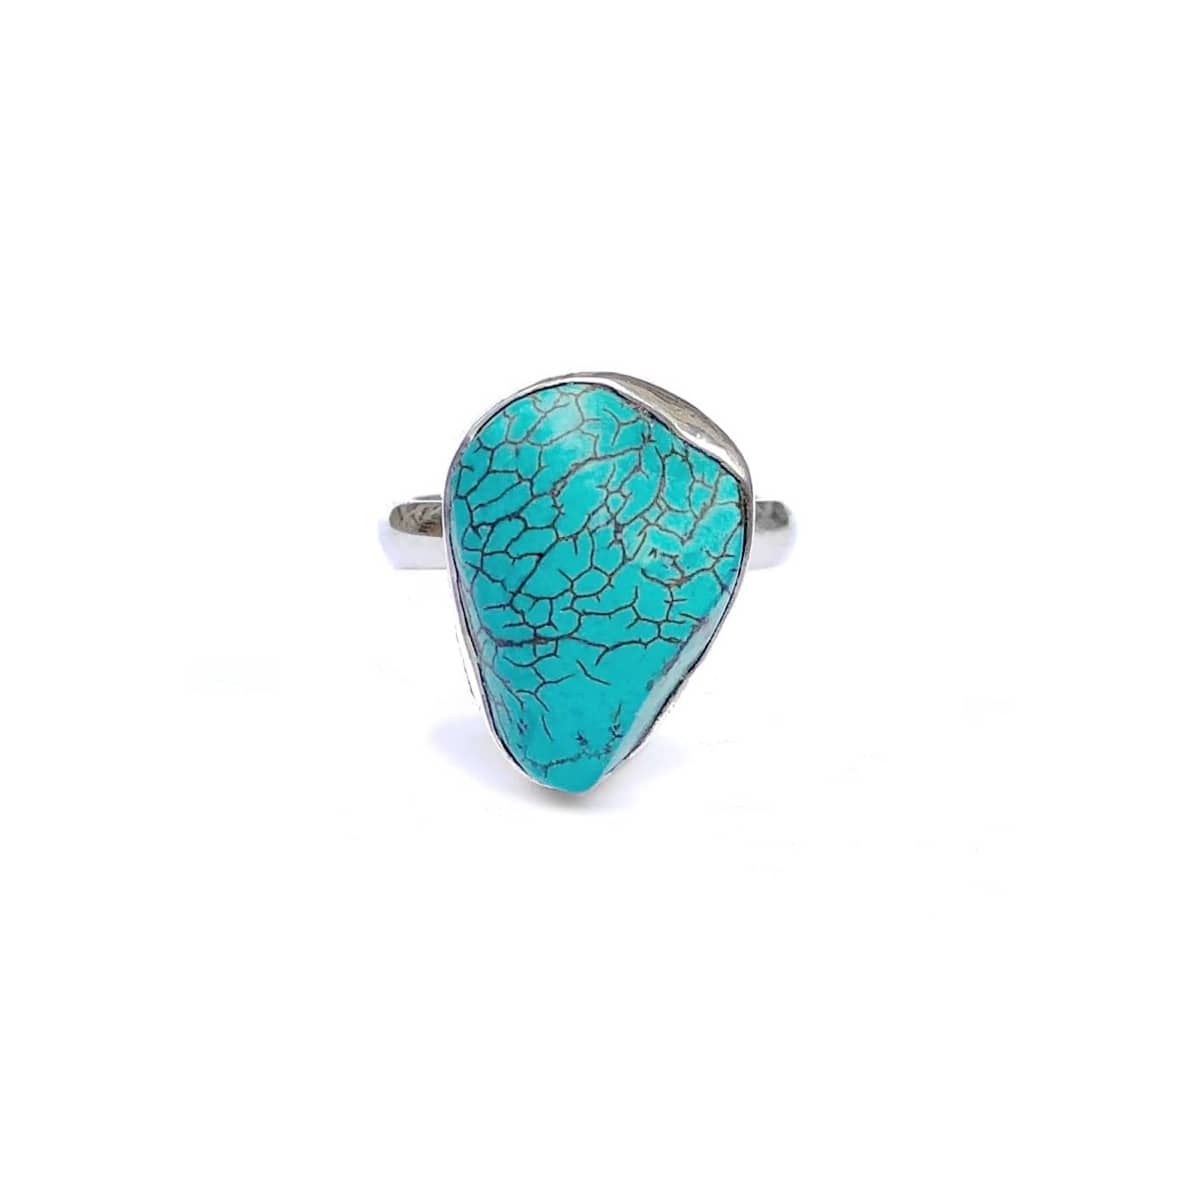 Boho Style Sterling Silver Rings Turquoise Freya Branwyn Como Ring Signature 